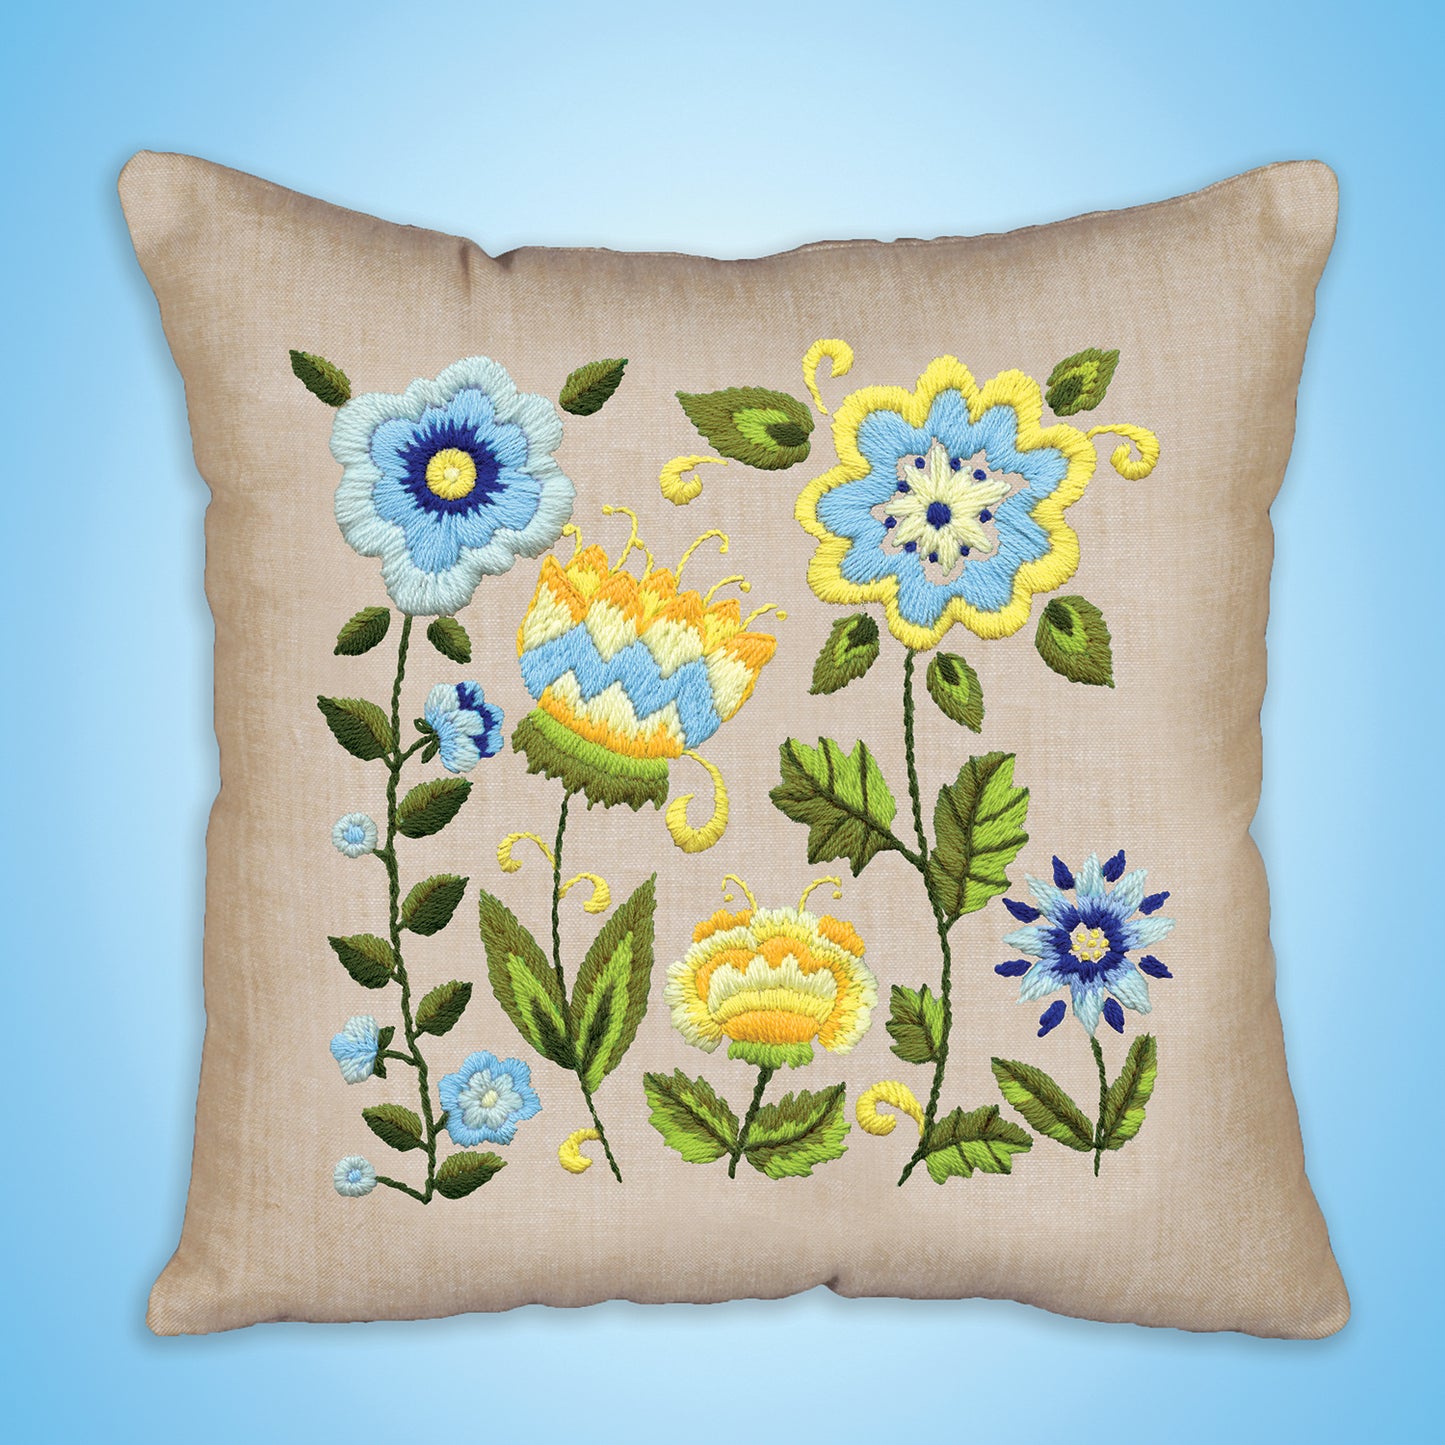 Floral Fantasy Crewel Embroidery Pillow Kit Primary Image